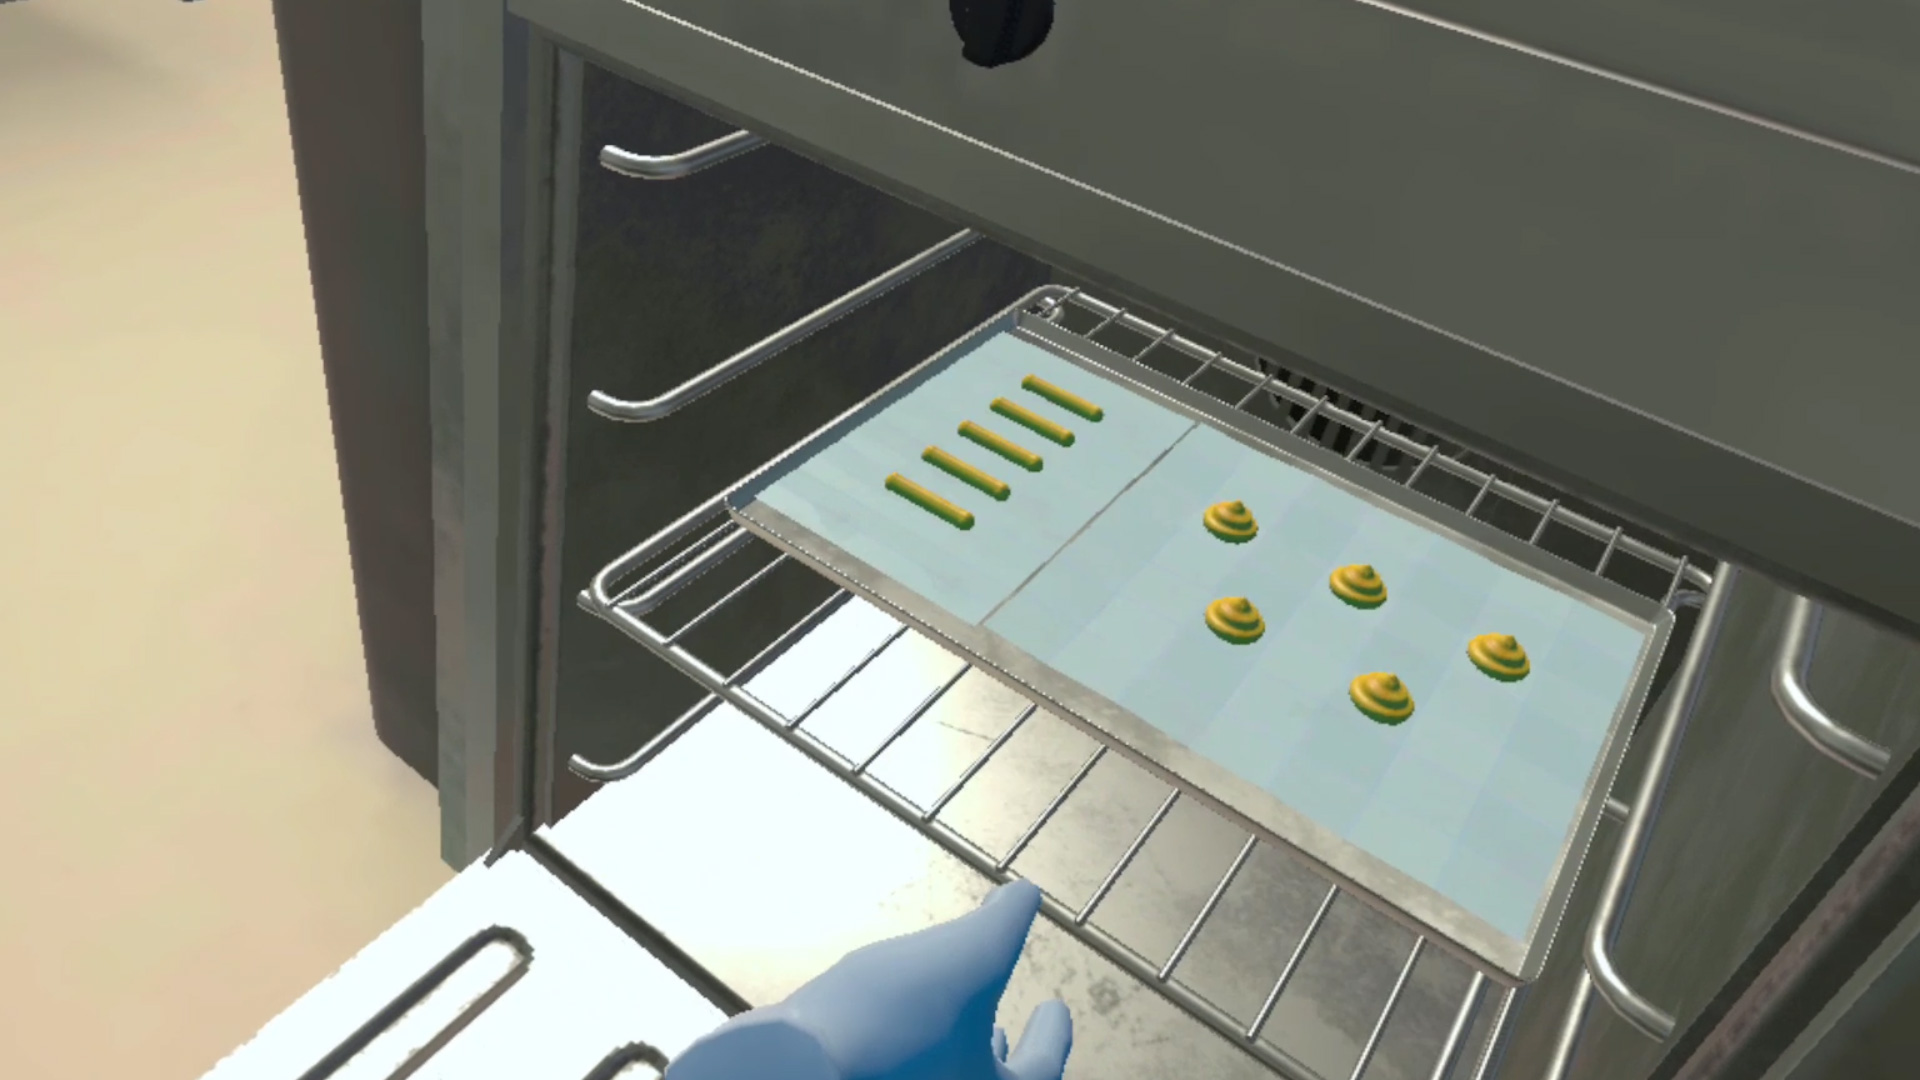 A screengrab from the VR Cooking Training showing the user putting profiteroles and eclairs in to the oven